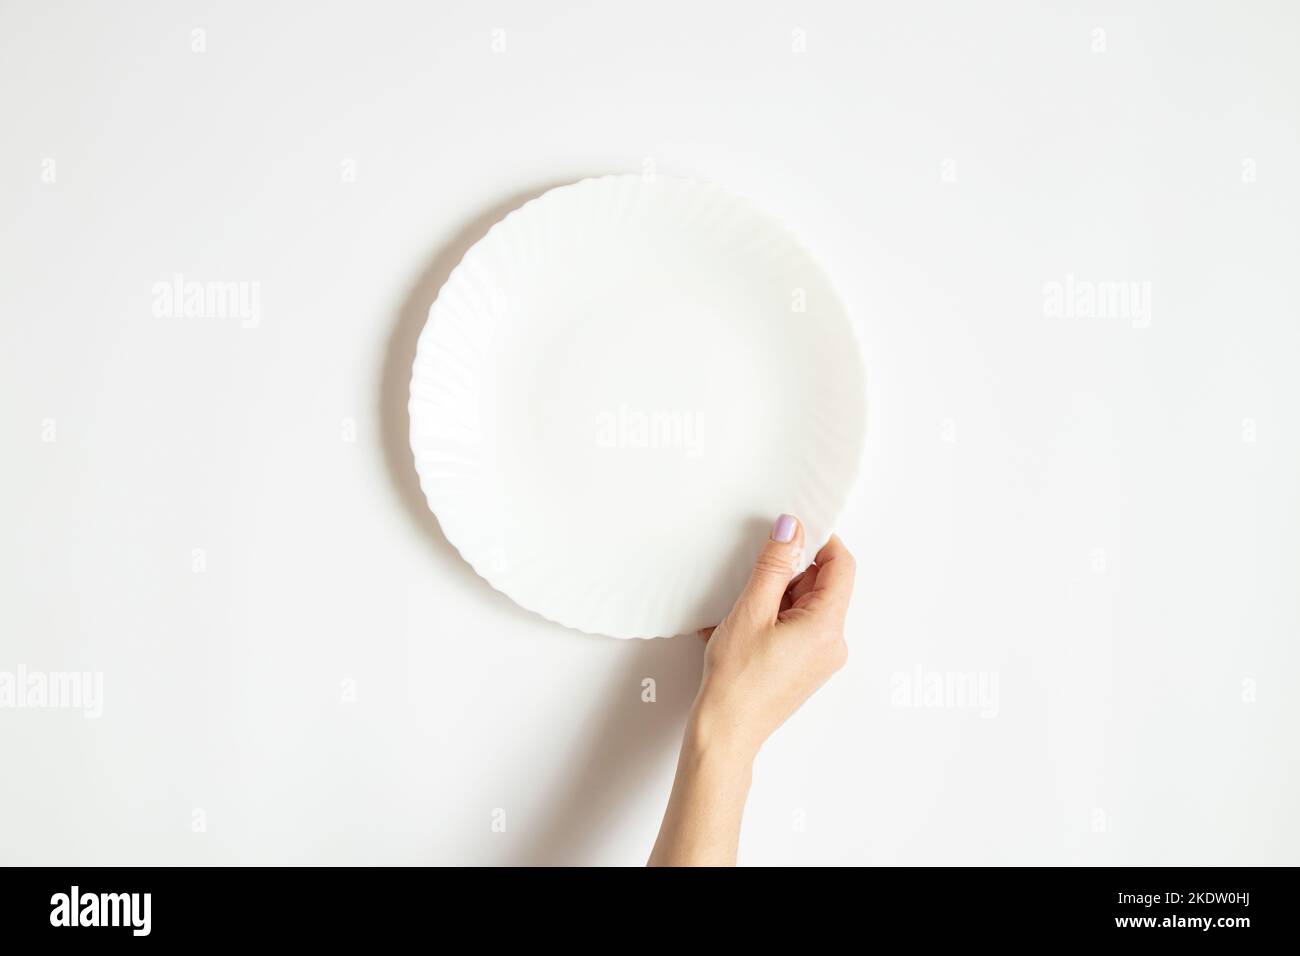 White clean plate in the hands of a girl on a white background close-up Stock Photo